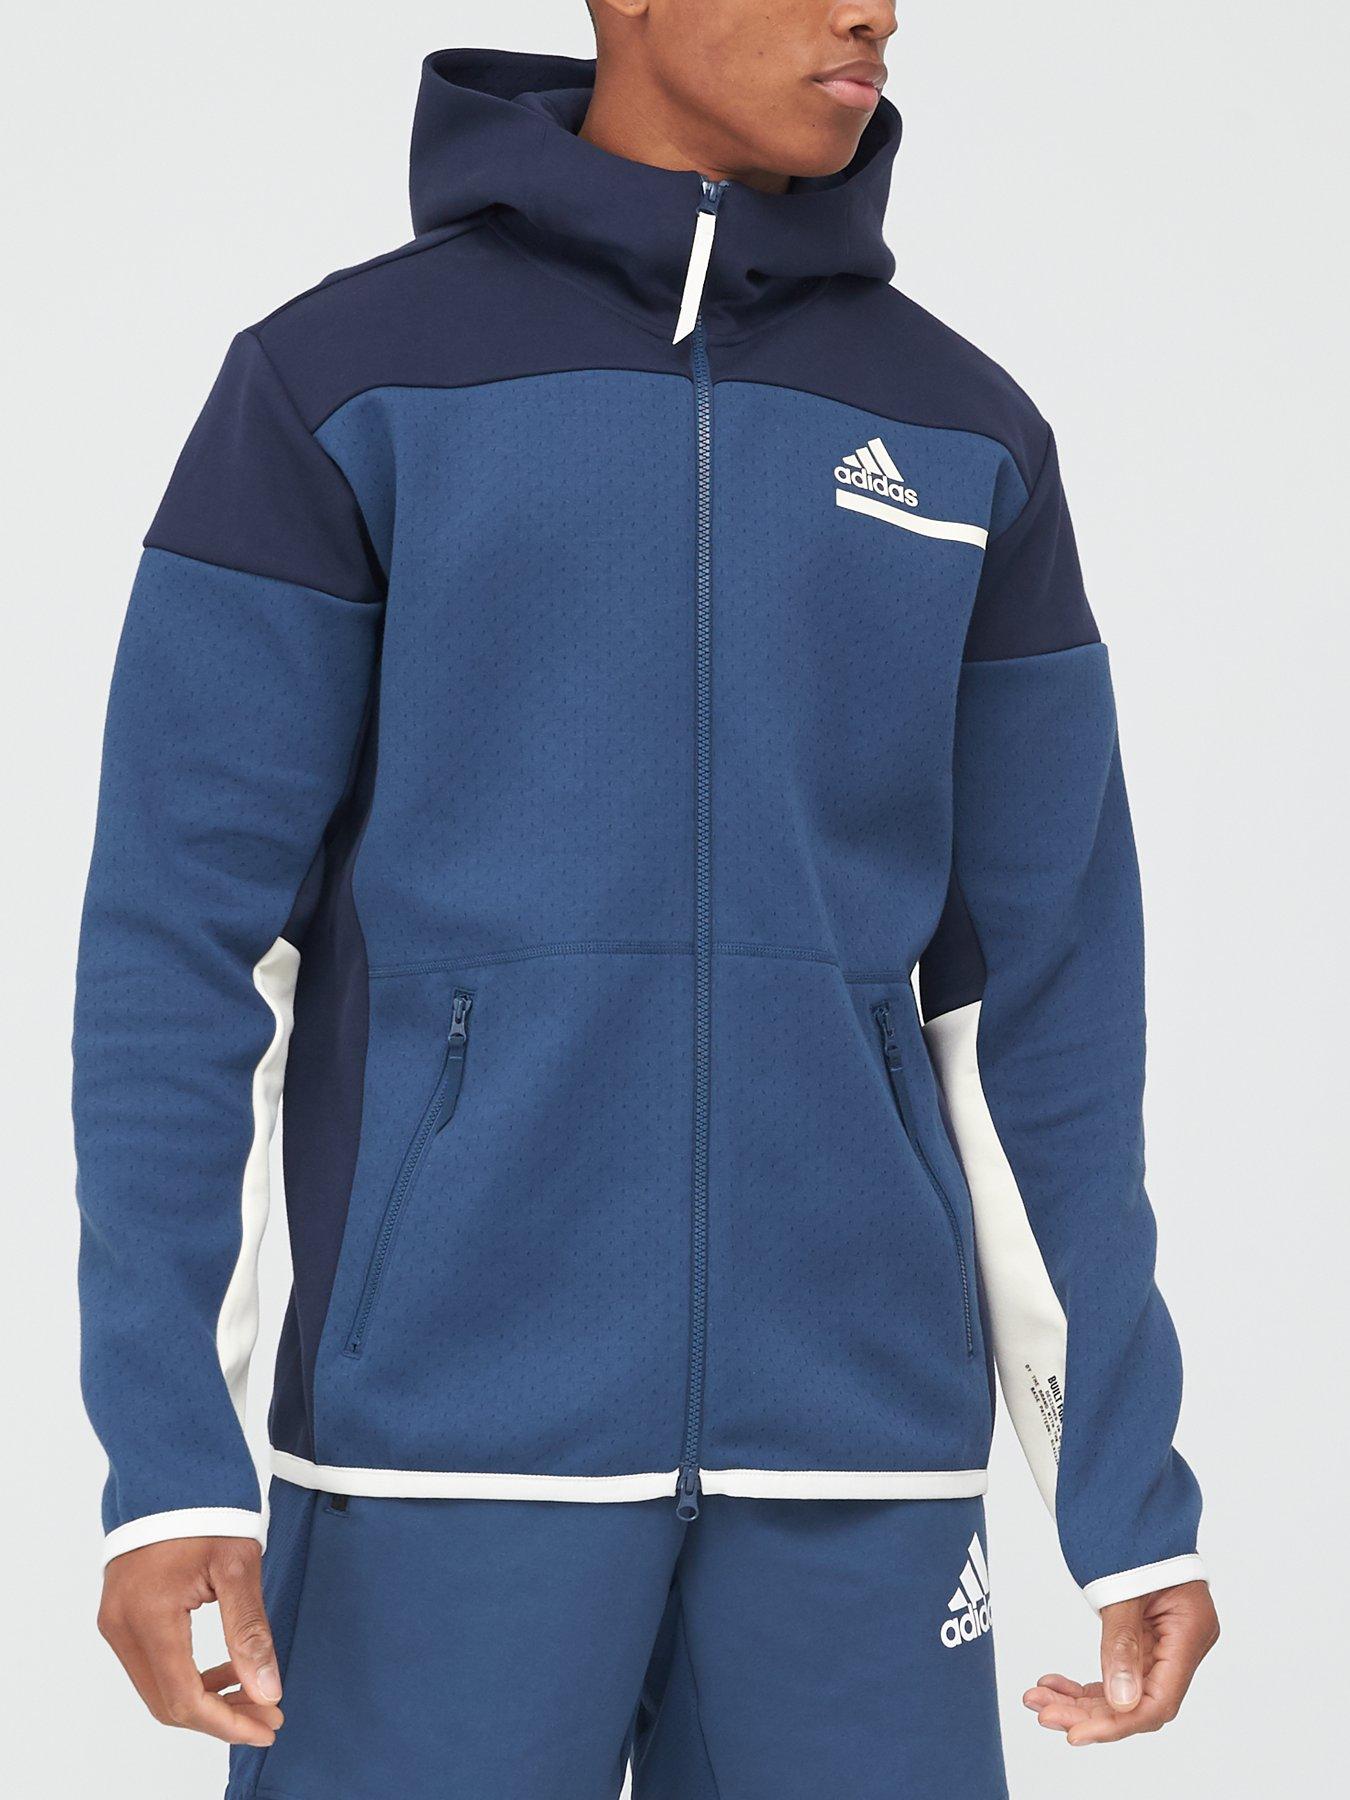 Adidas Zne Full Zip Hoodie For Sale Off 68